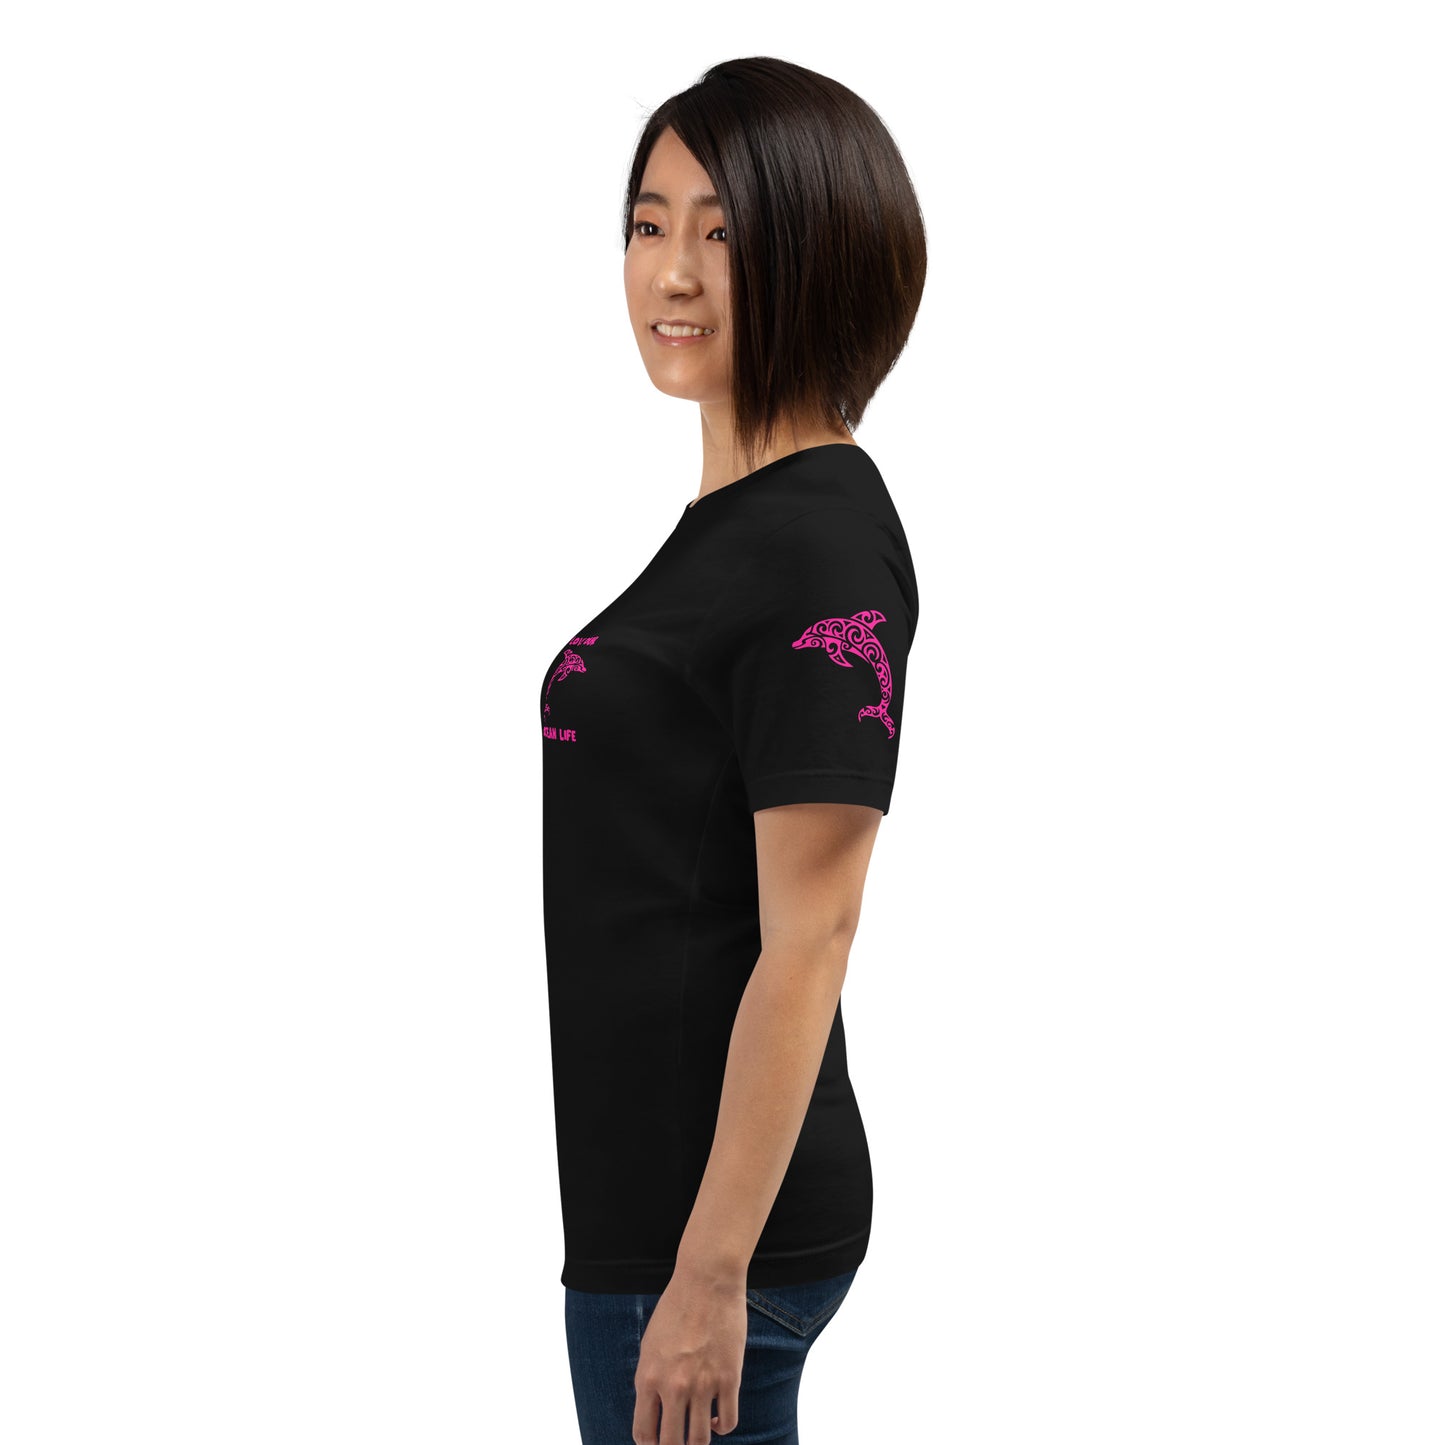 Polynesian Dolphin T-shirt For Men and Women Left Pink on Black